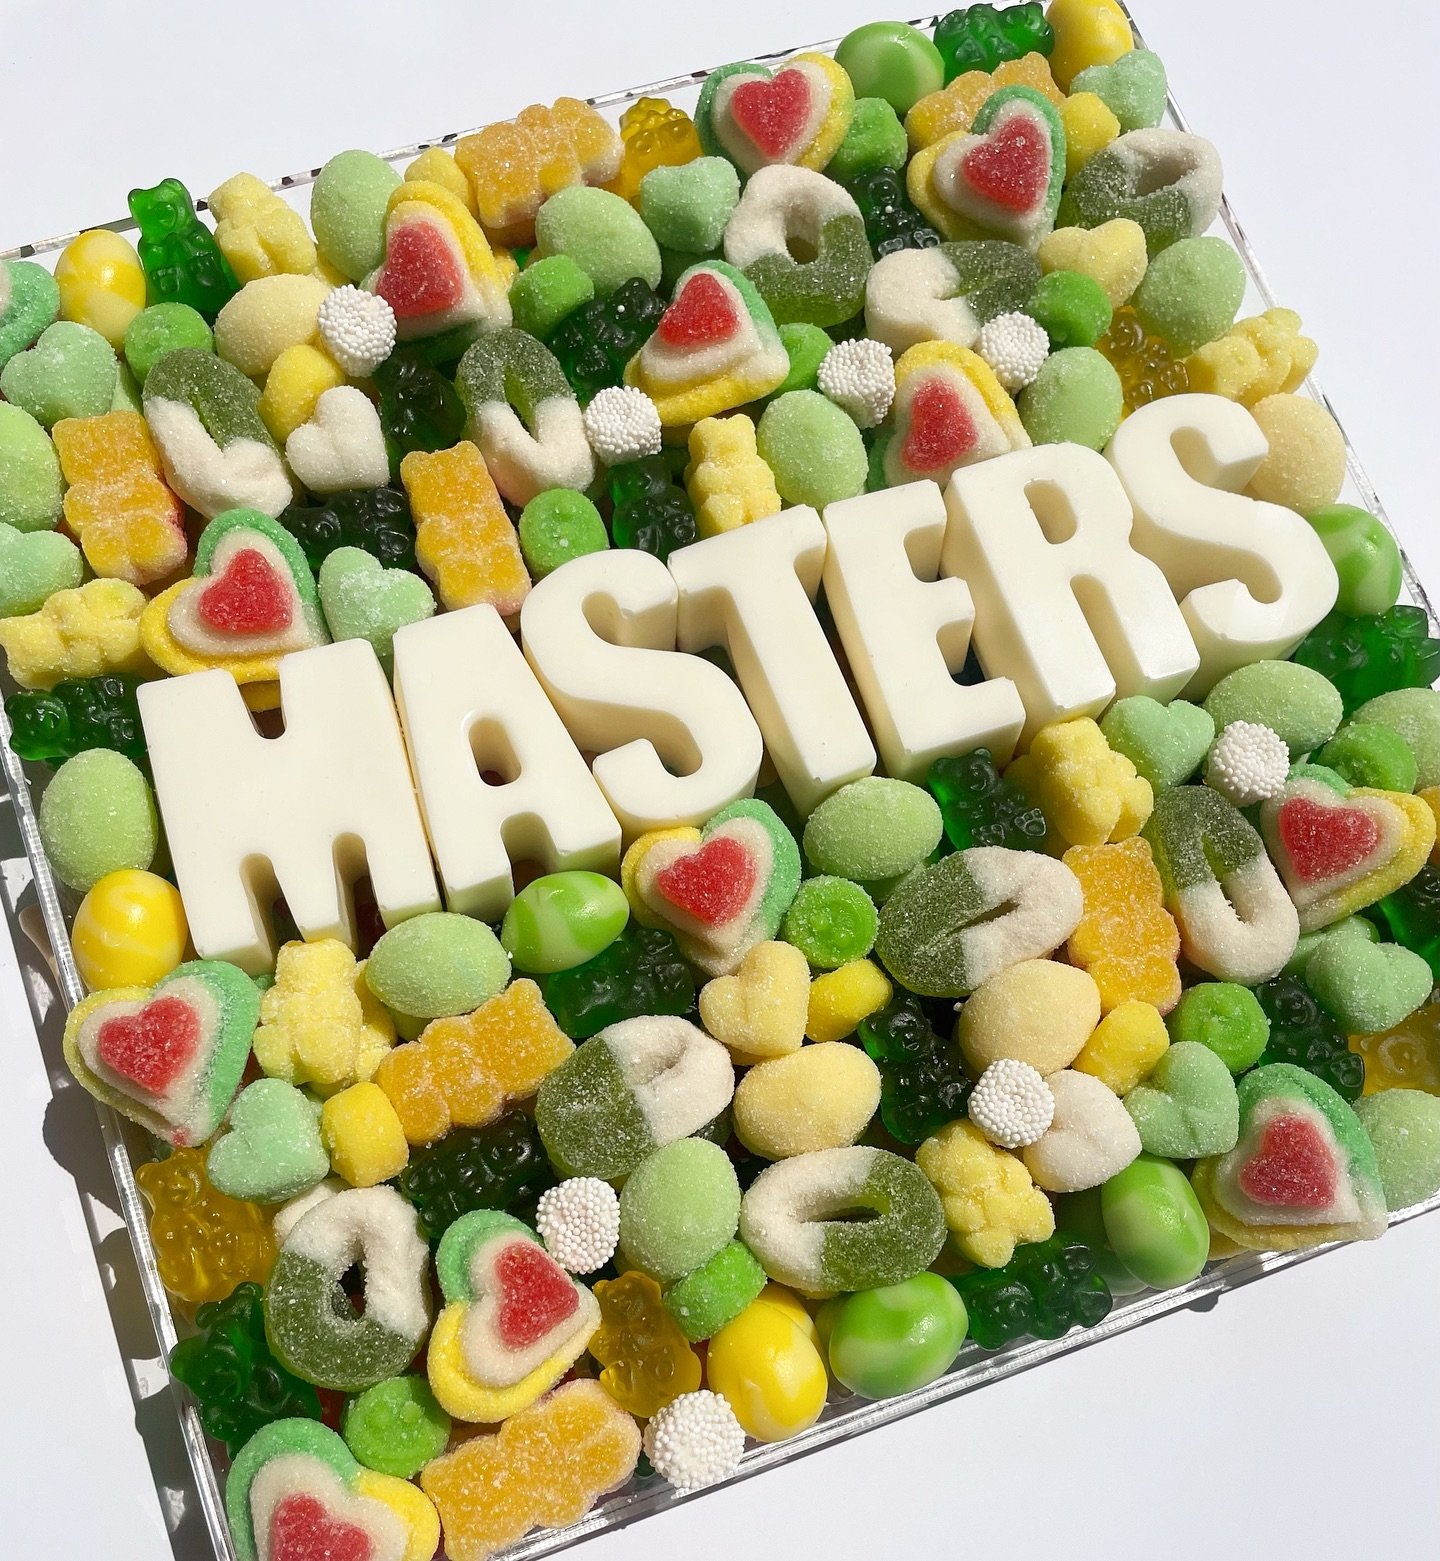 IT&rsquo;S MASTERS WEEK! ⛳️⭐️🏌️&zwj;♂️ 
&amp; we are doing a GIVEAWAY! 
One 10&rdquo;x10&rdquo; MASTERS square!
To enter: 
⛳️ folllow us! 
⛳️ tag 3 friends! 
⛳️ like this post!

winner will be announced in 24 hours- April 9th at 5:30pm CT